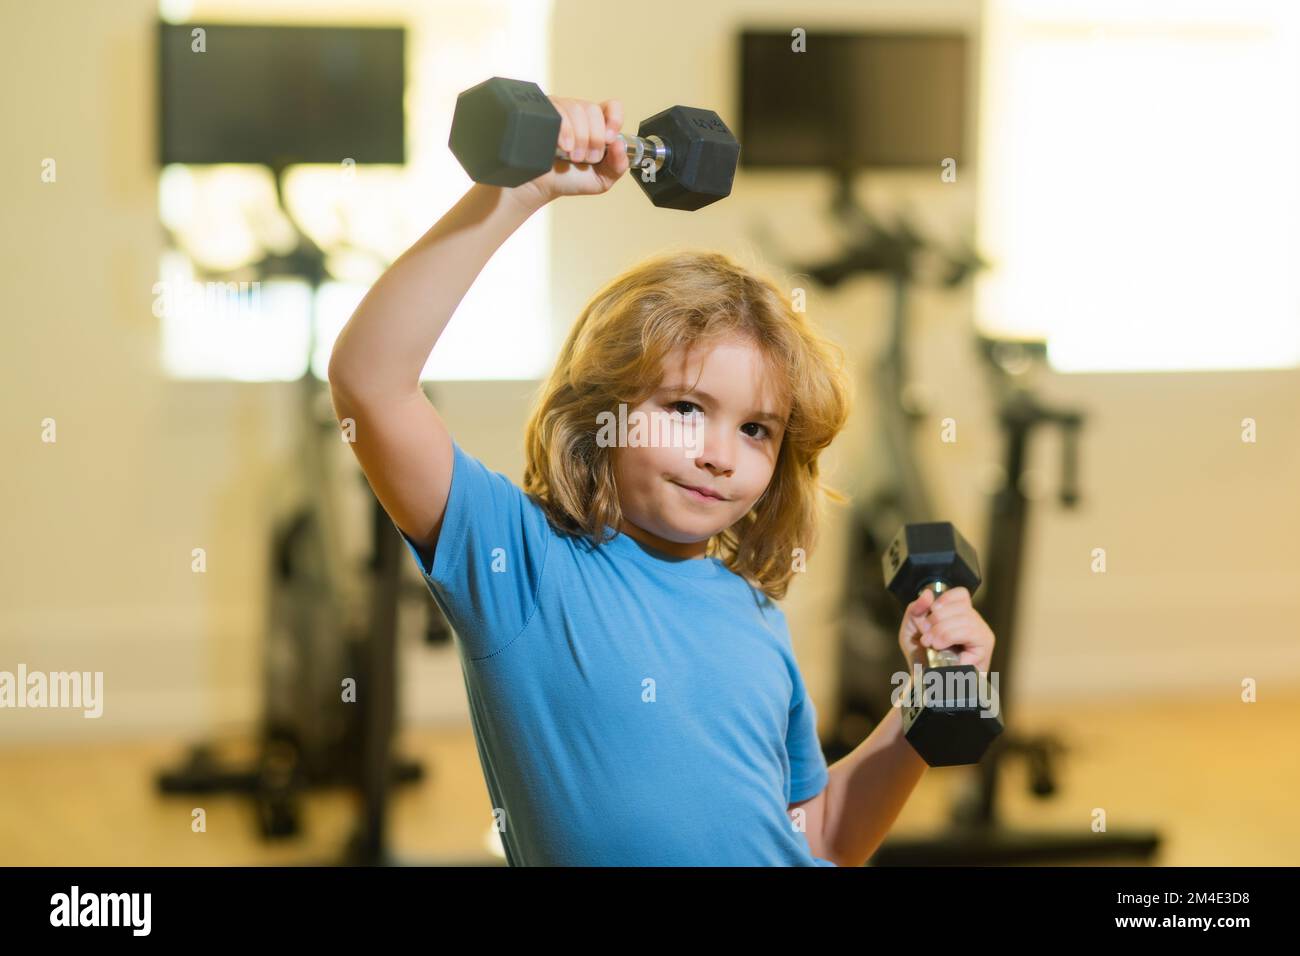 Child workout kid in gym. Kid sport. Child exercising with dumbbells. Sporty child with dumbbell. Stock Photo